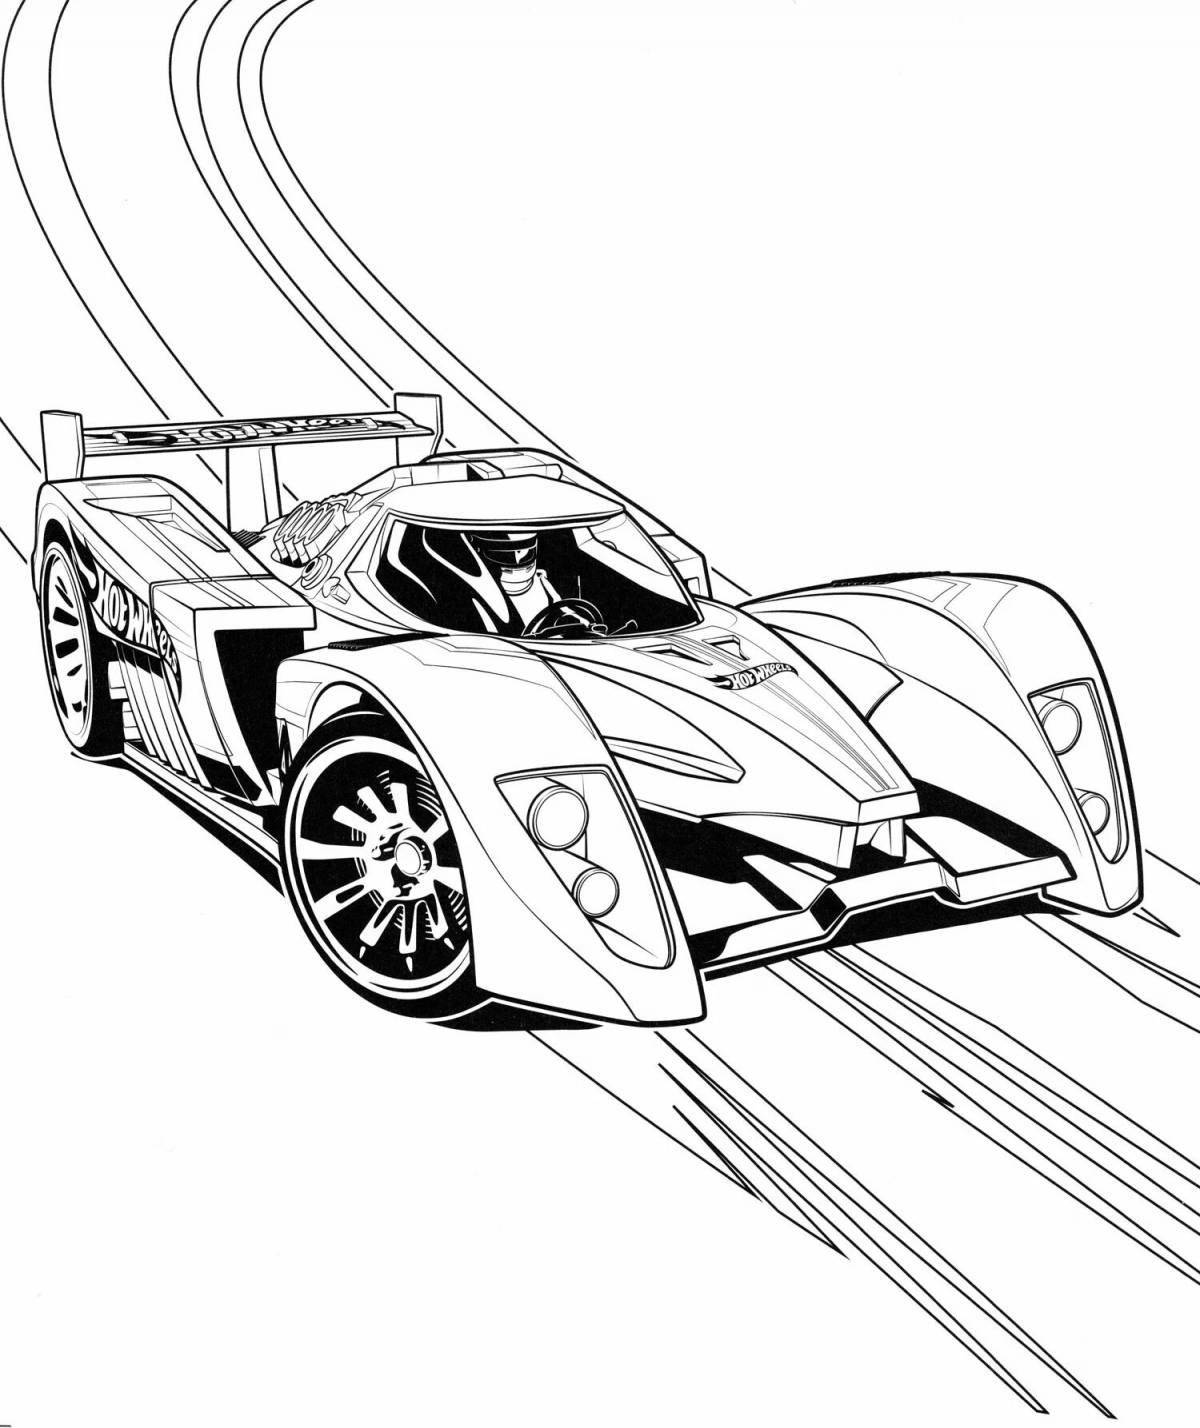 Adorable race track coloring page